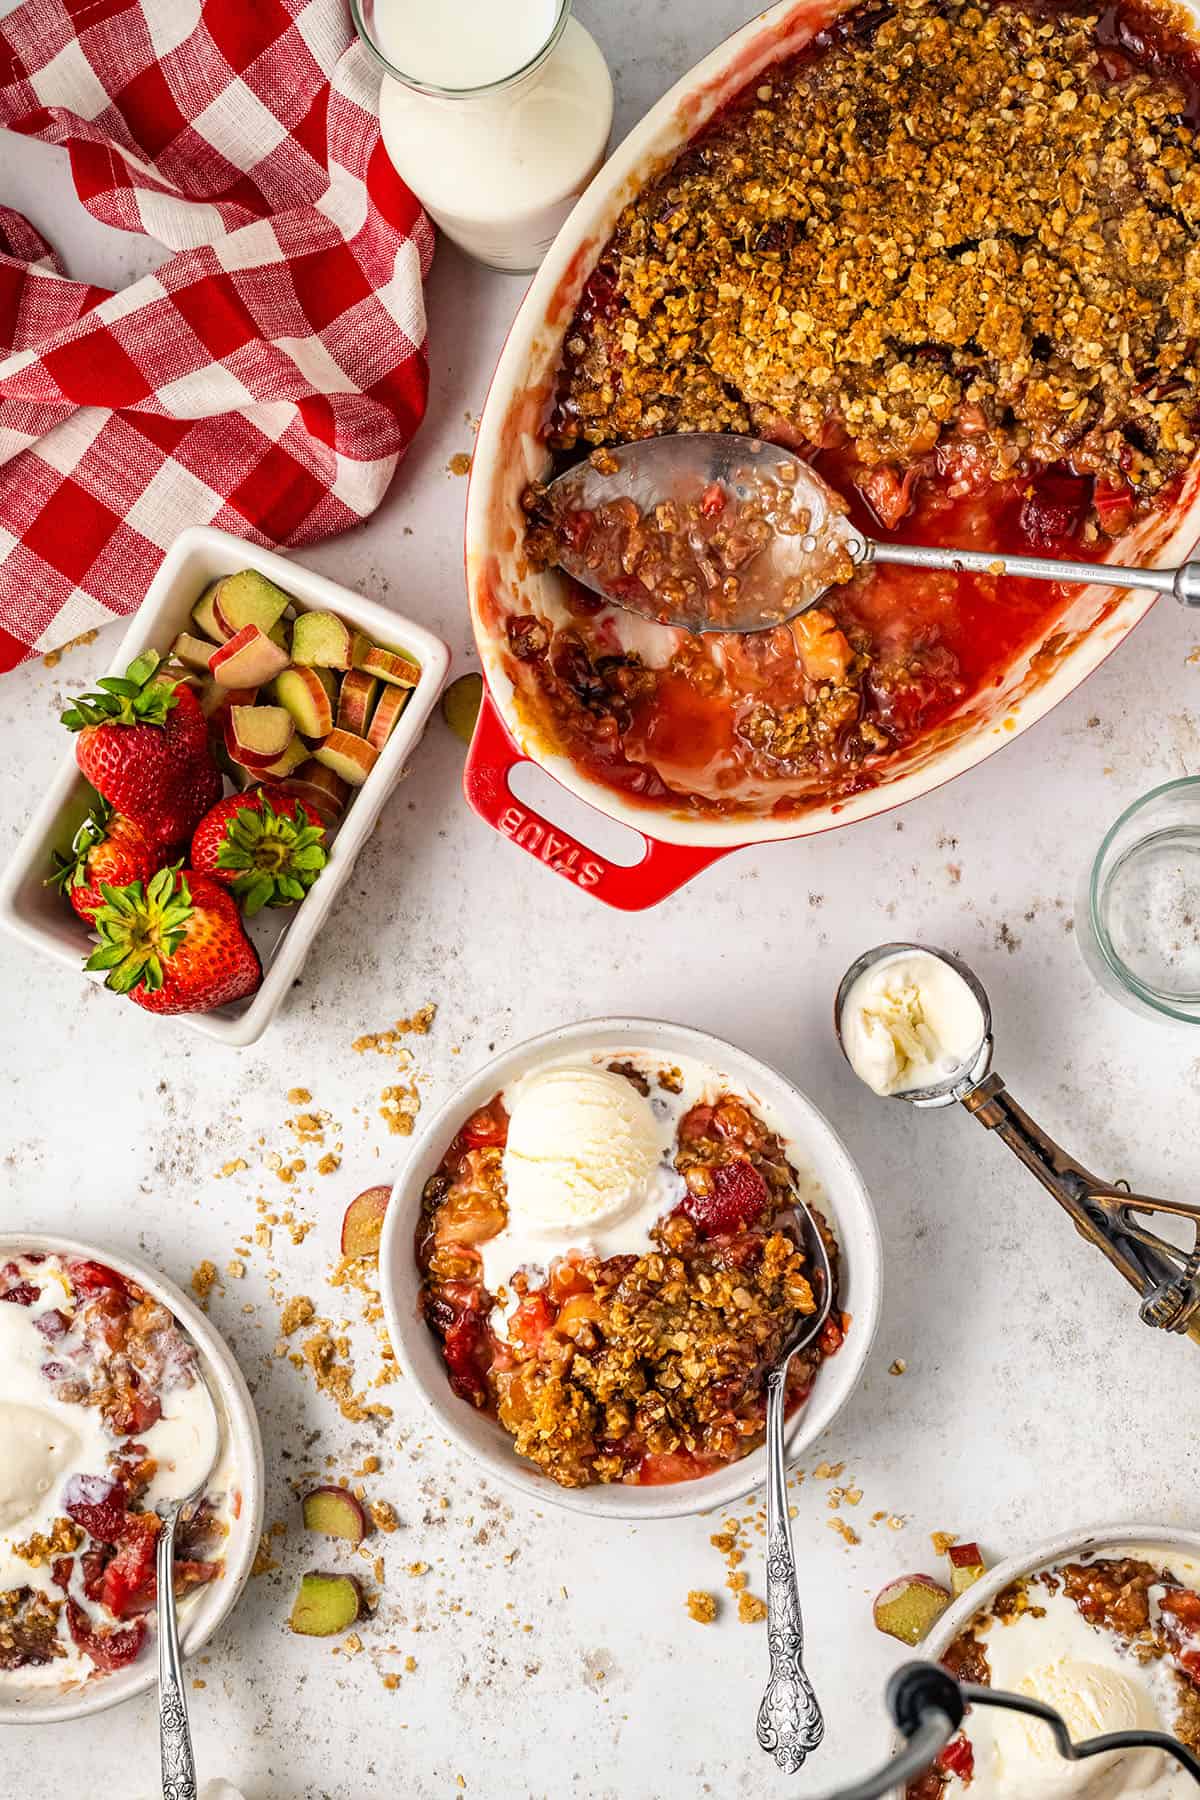 A red baking dish of strawberry rhubarb crisp with a serving spoon, on a white counter surrounded by a bowl of crisp with ice cream, an ice cream scoop, strawberries, and a red and white checkered towel. 